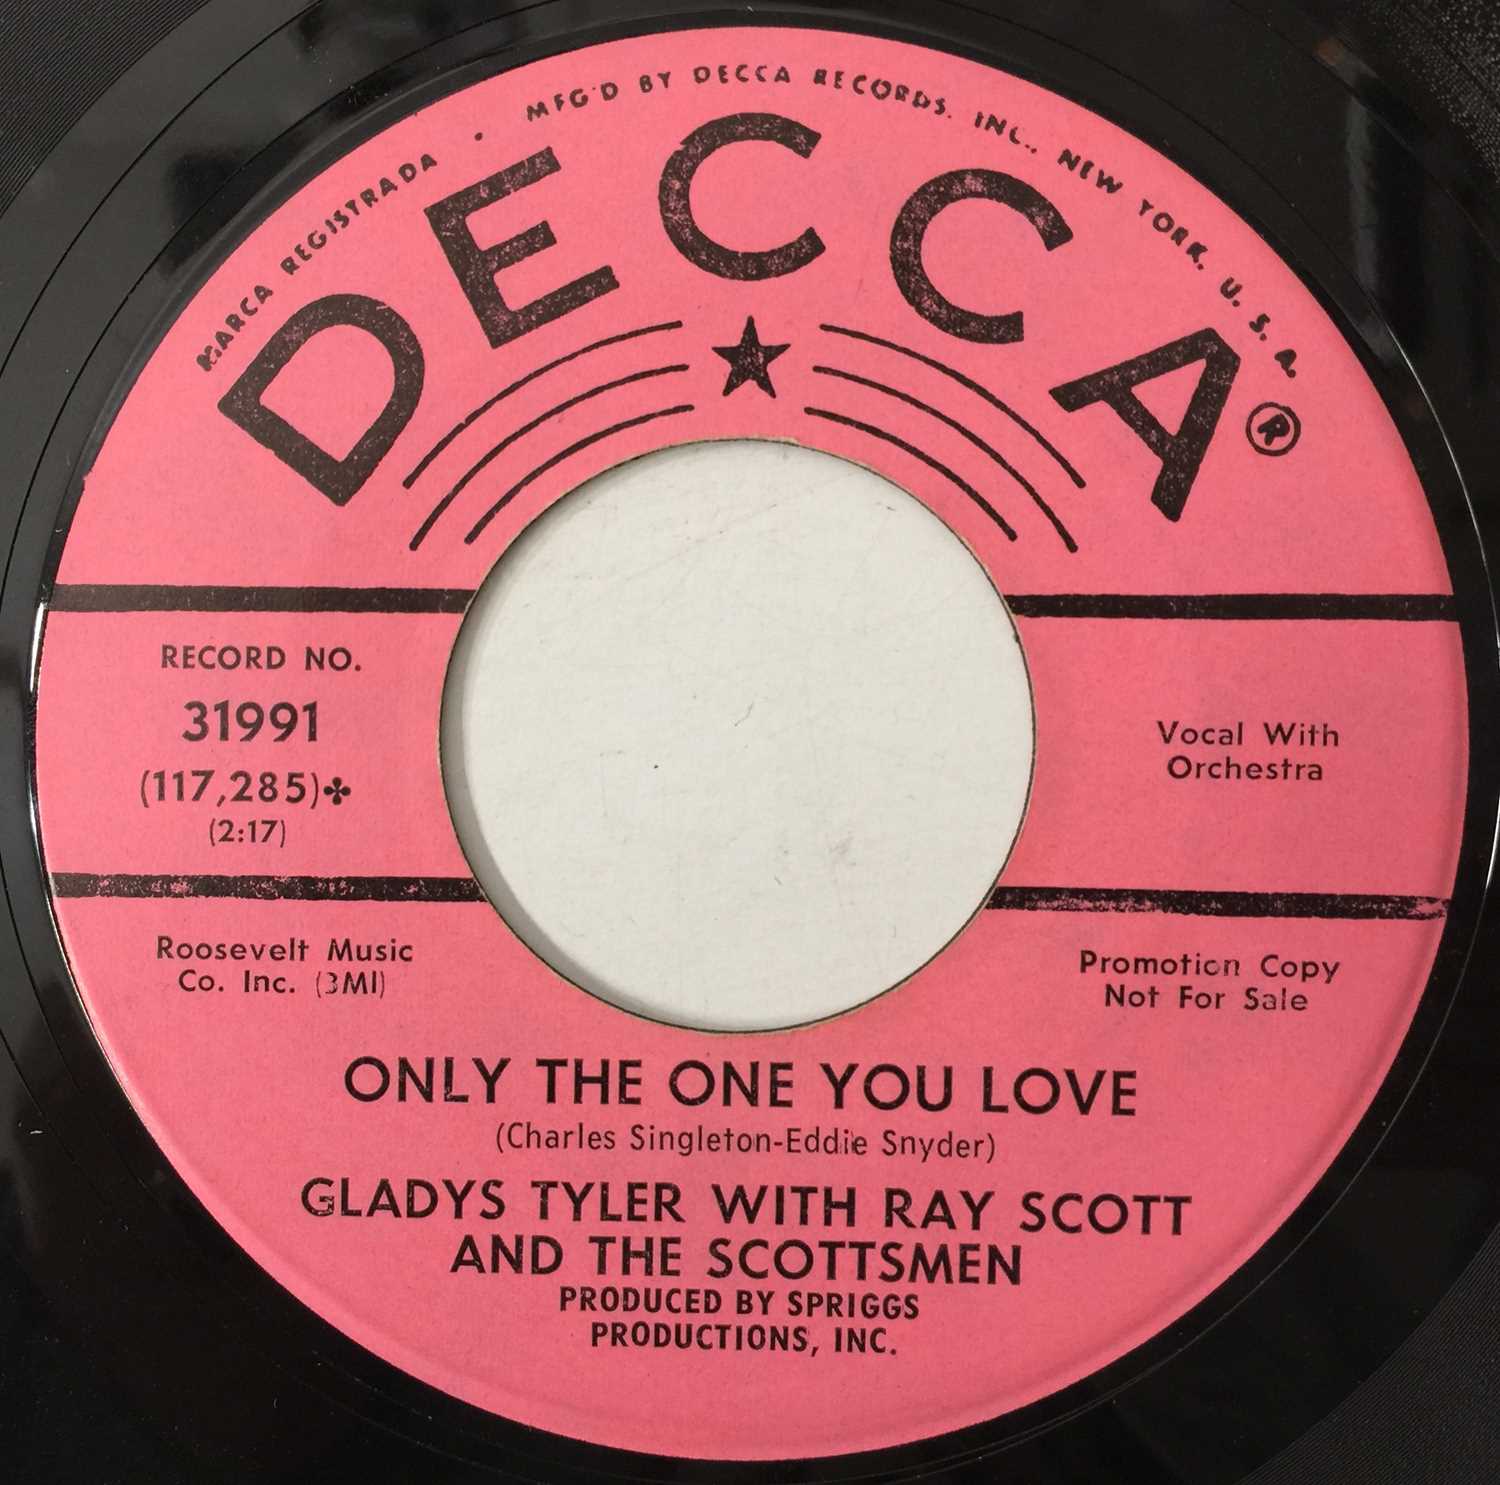 GLADYS TYLER - A LITTLE BITTY GIRL 7" (US PROMO - DECCA - 31991) - Image 3 of 3